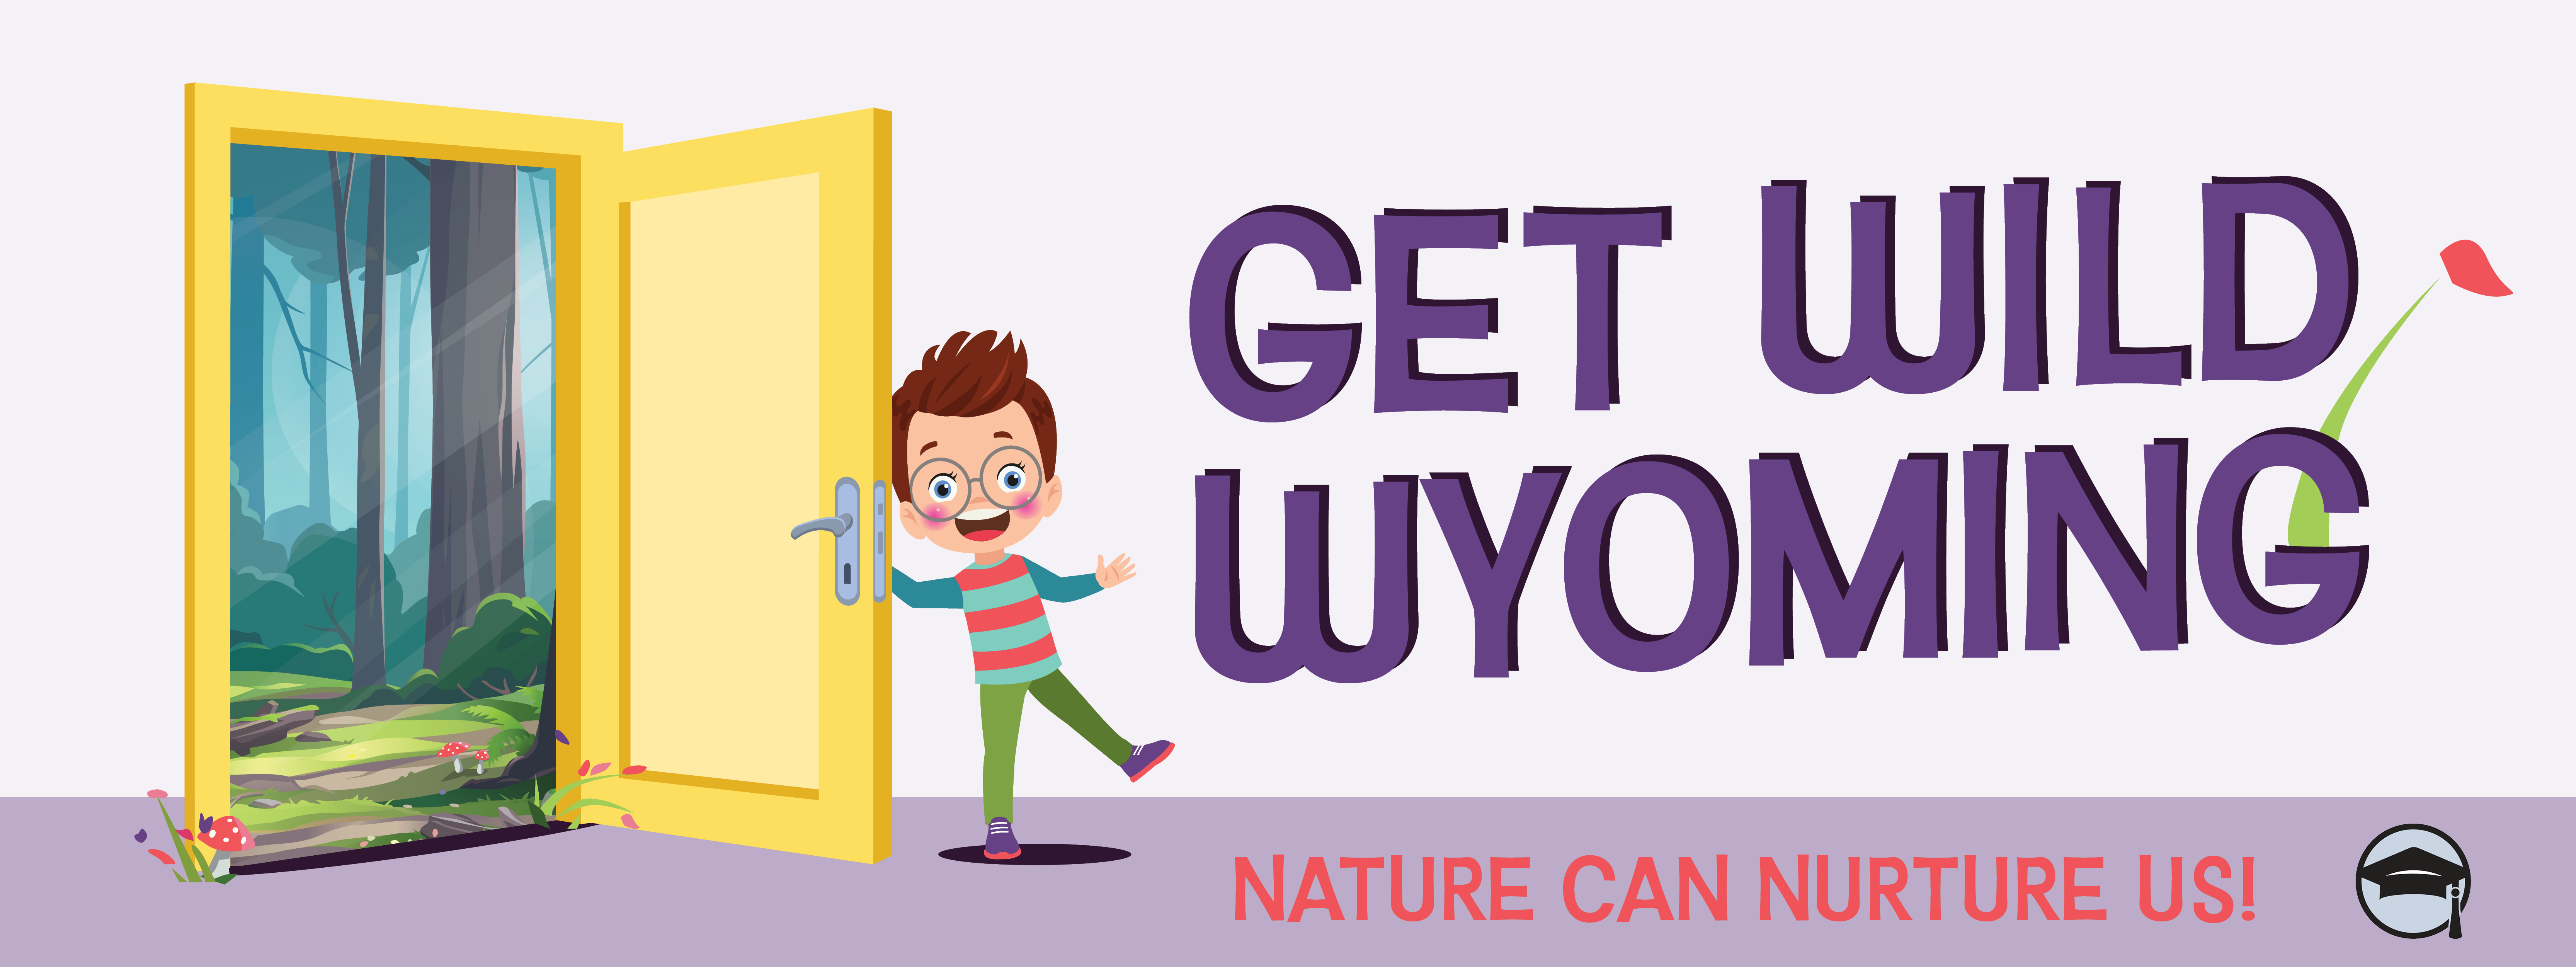 Get Wild Wyoming Logo with young boy holding a yellow door open exposing a forest scene. The words Nature Can Nurture Us and the Wyoming Department of Education logo are in the lower right corner of the image.